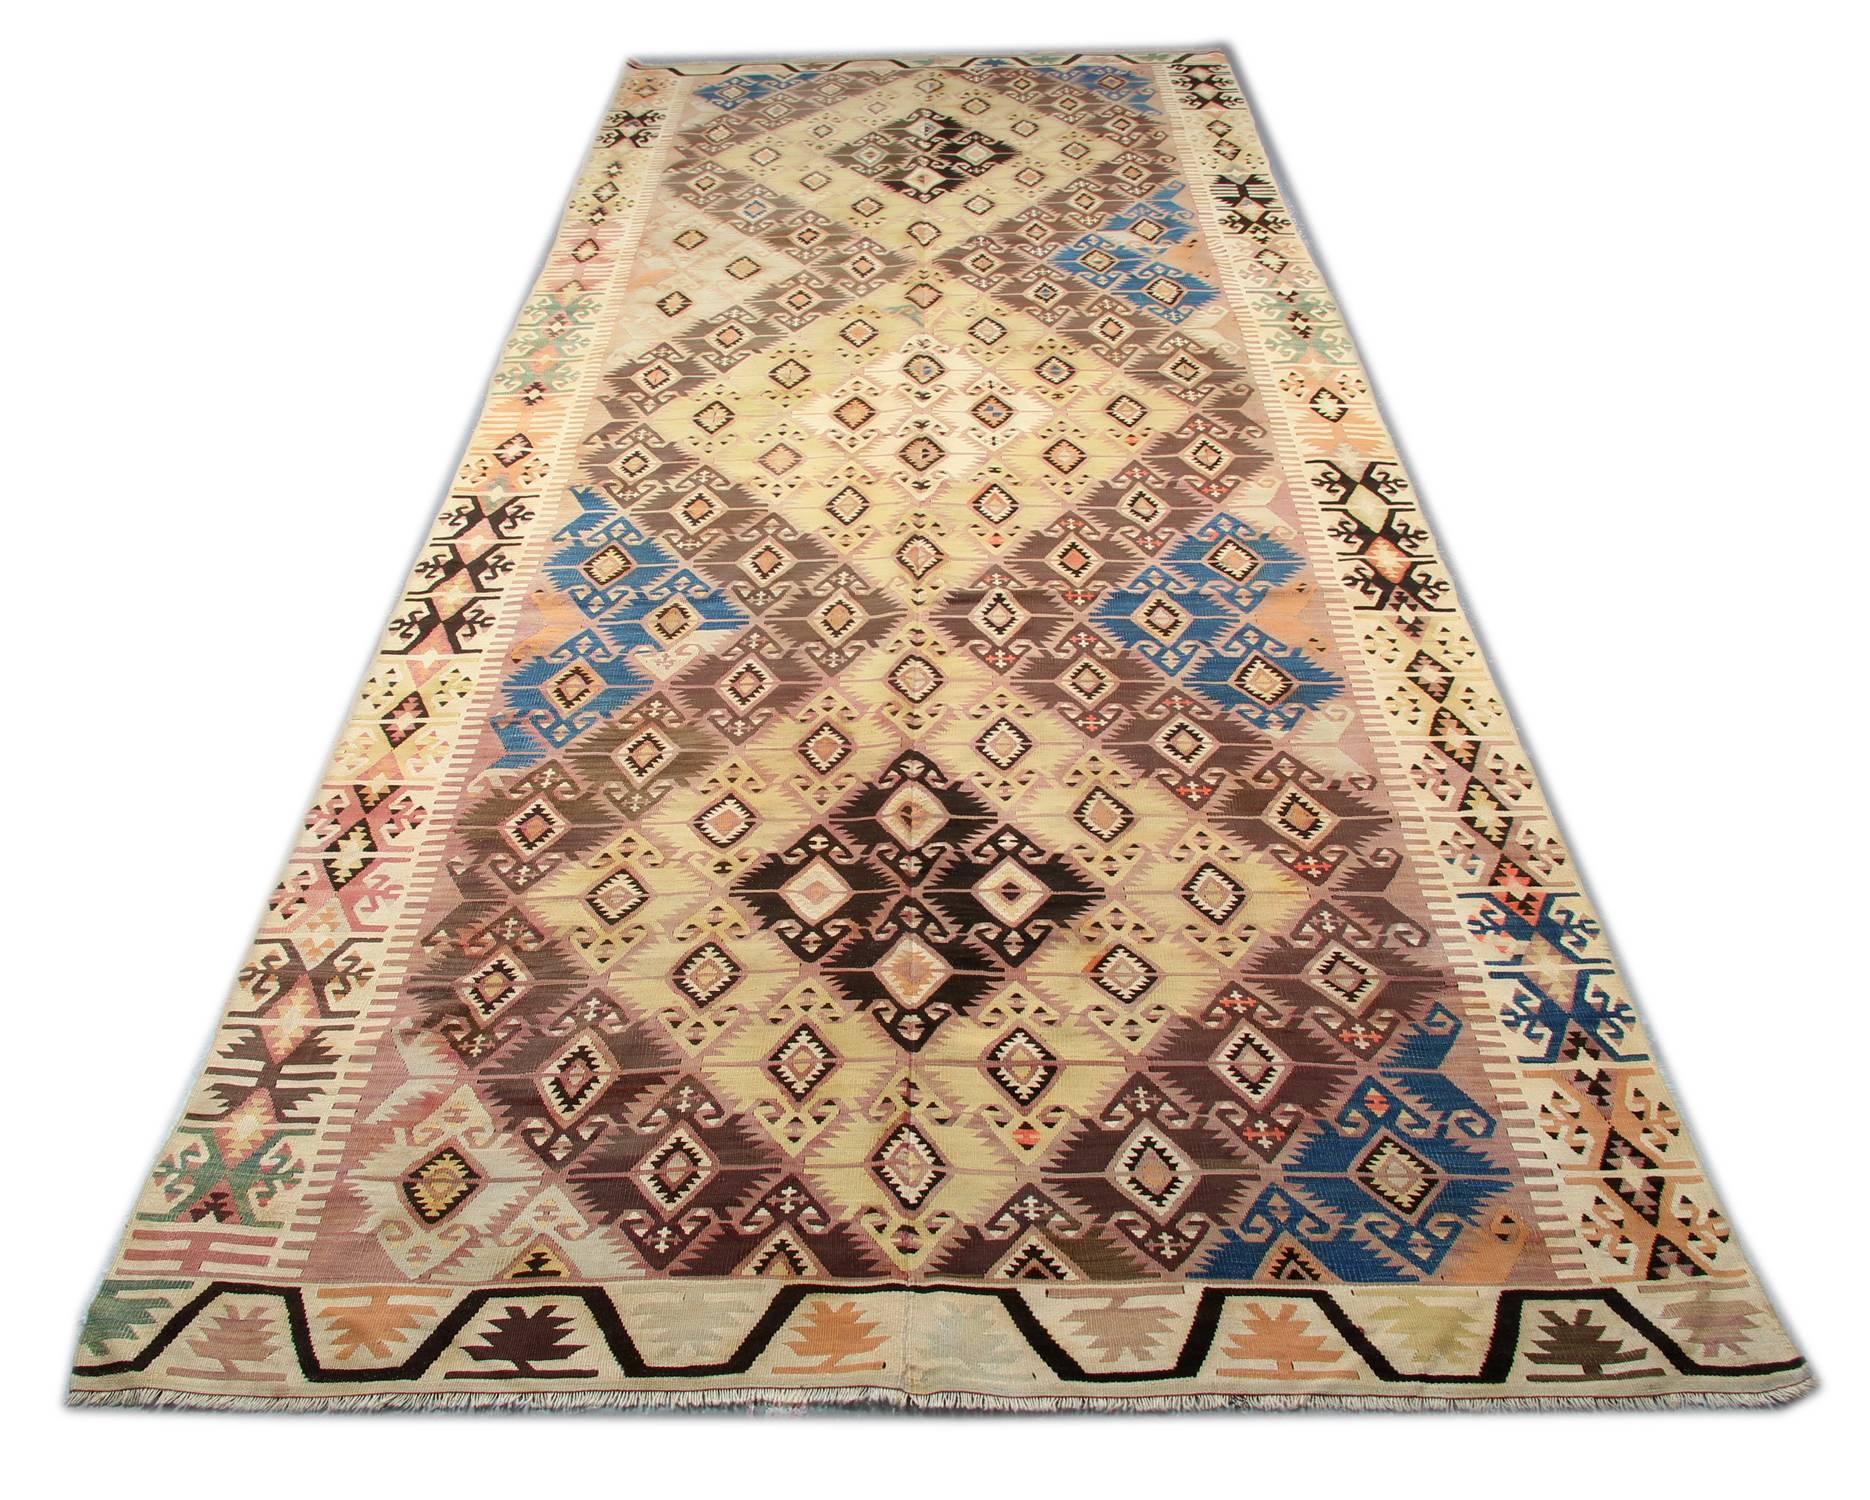 This handmade carpet colorful rug is a Turkish carpet rug has woven by very skilled weavers in Turkey, who used the highest quality wool and cotton. The flat-weave rug has a light orange, orange, green, white, cream, gold, blue, yellow and dark